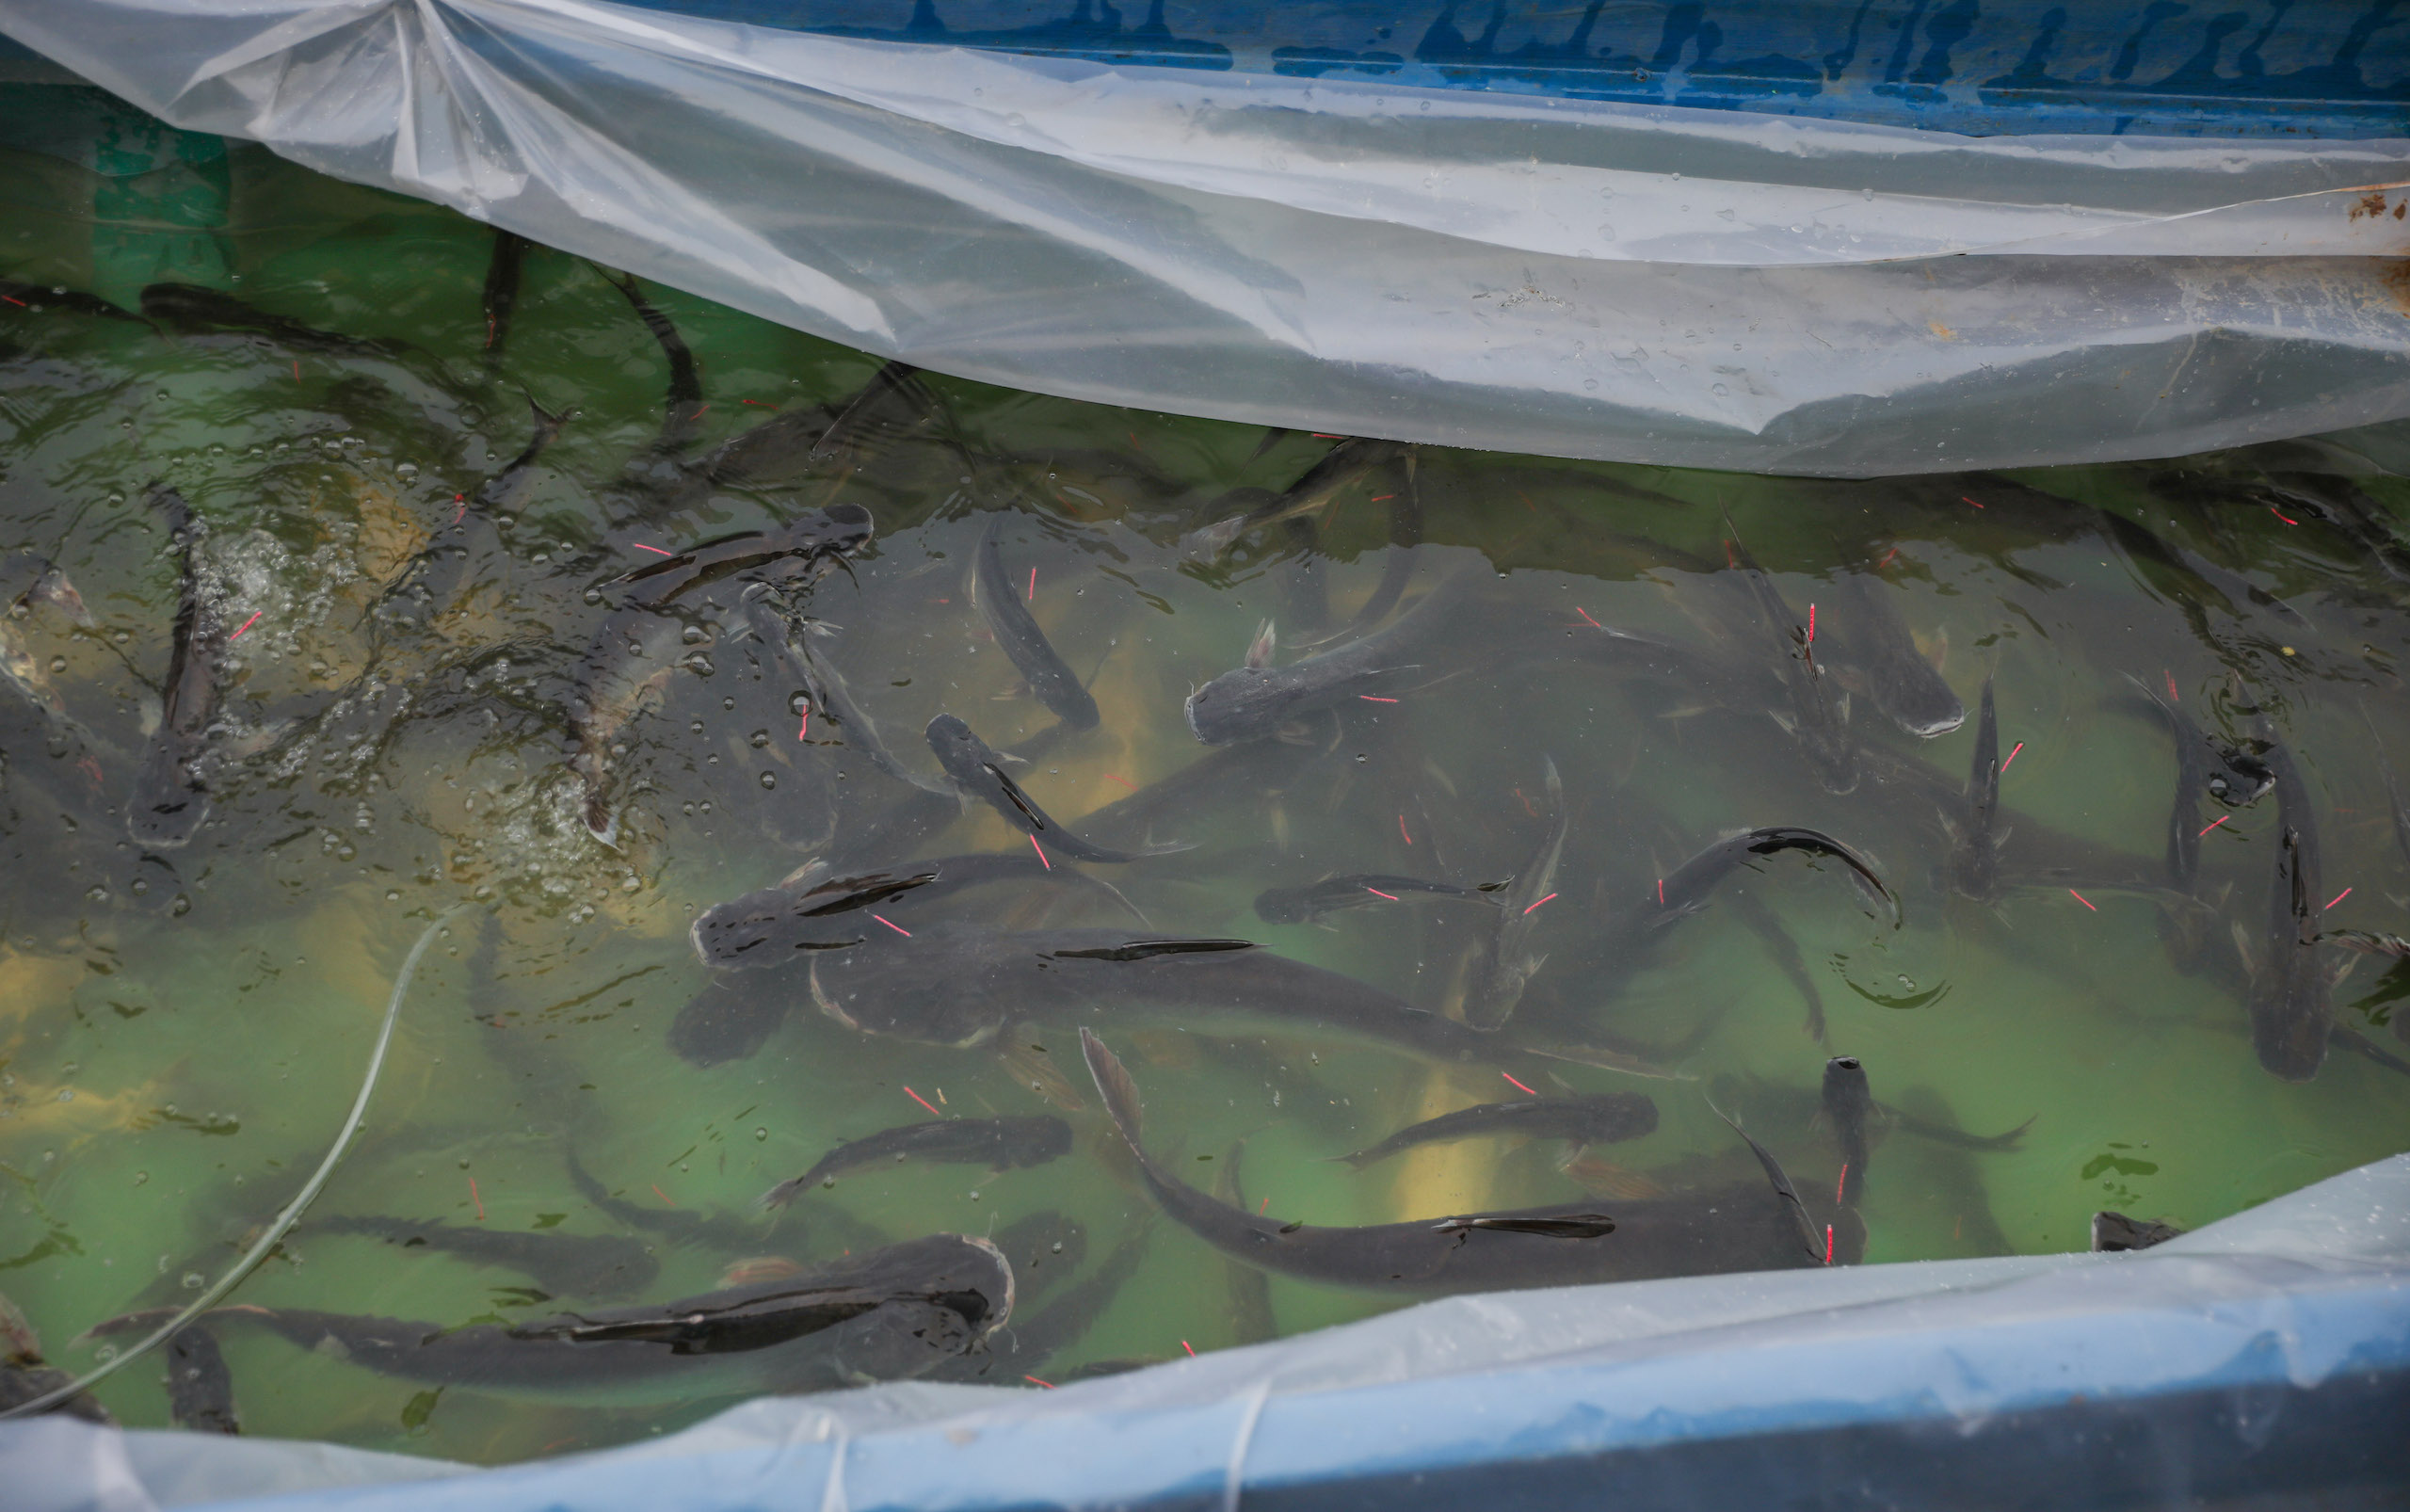 largest ever fish release on Tonle Sap Lake